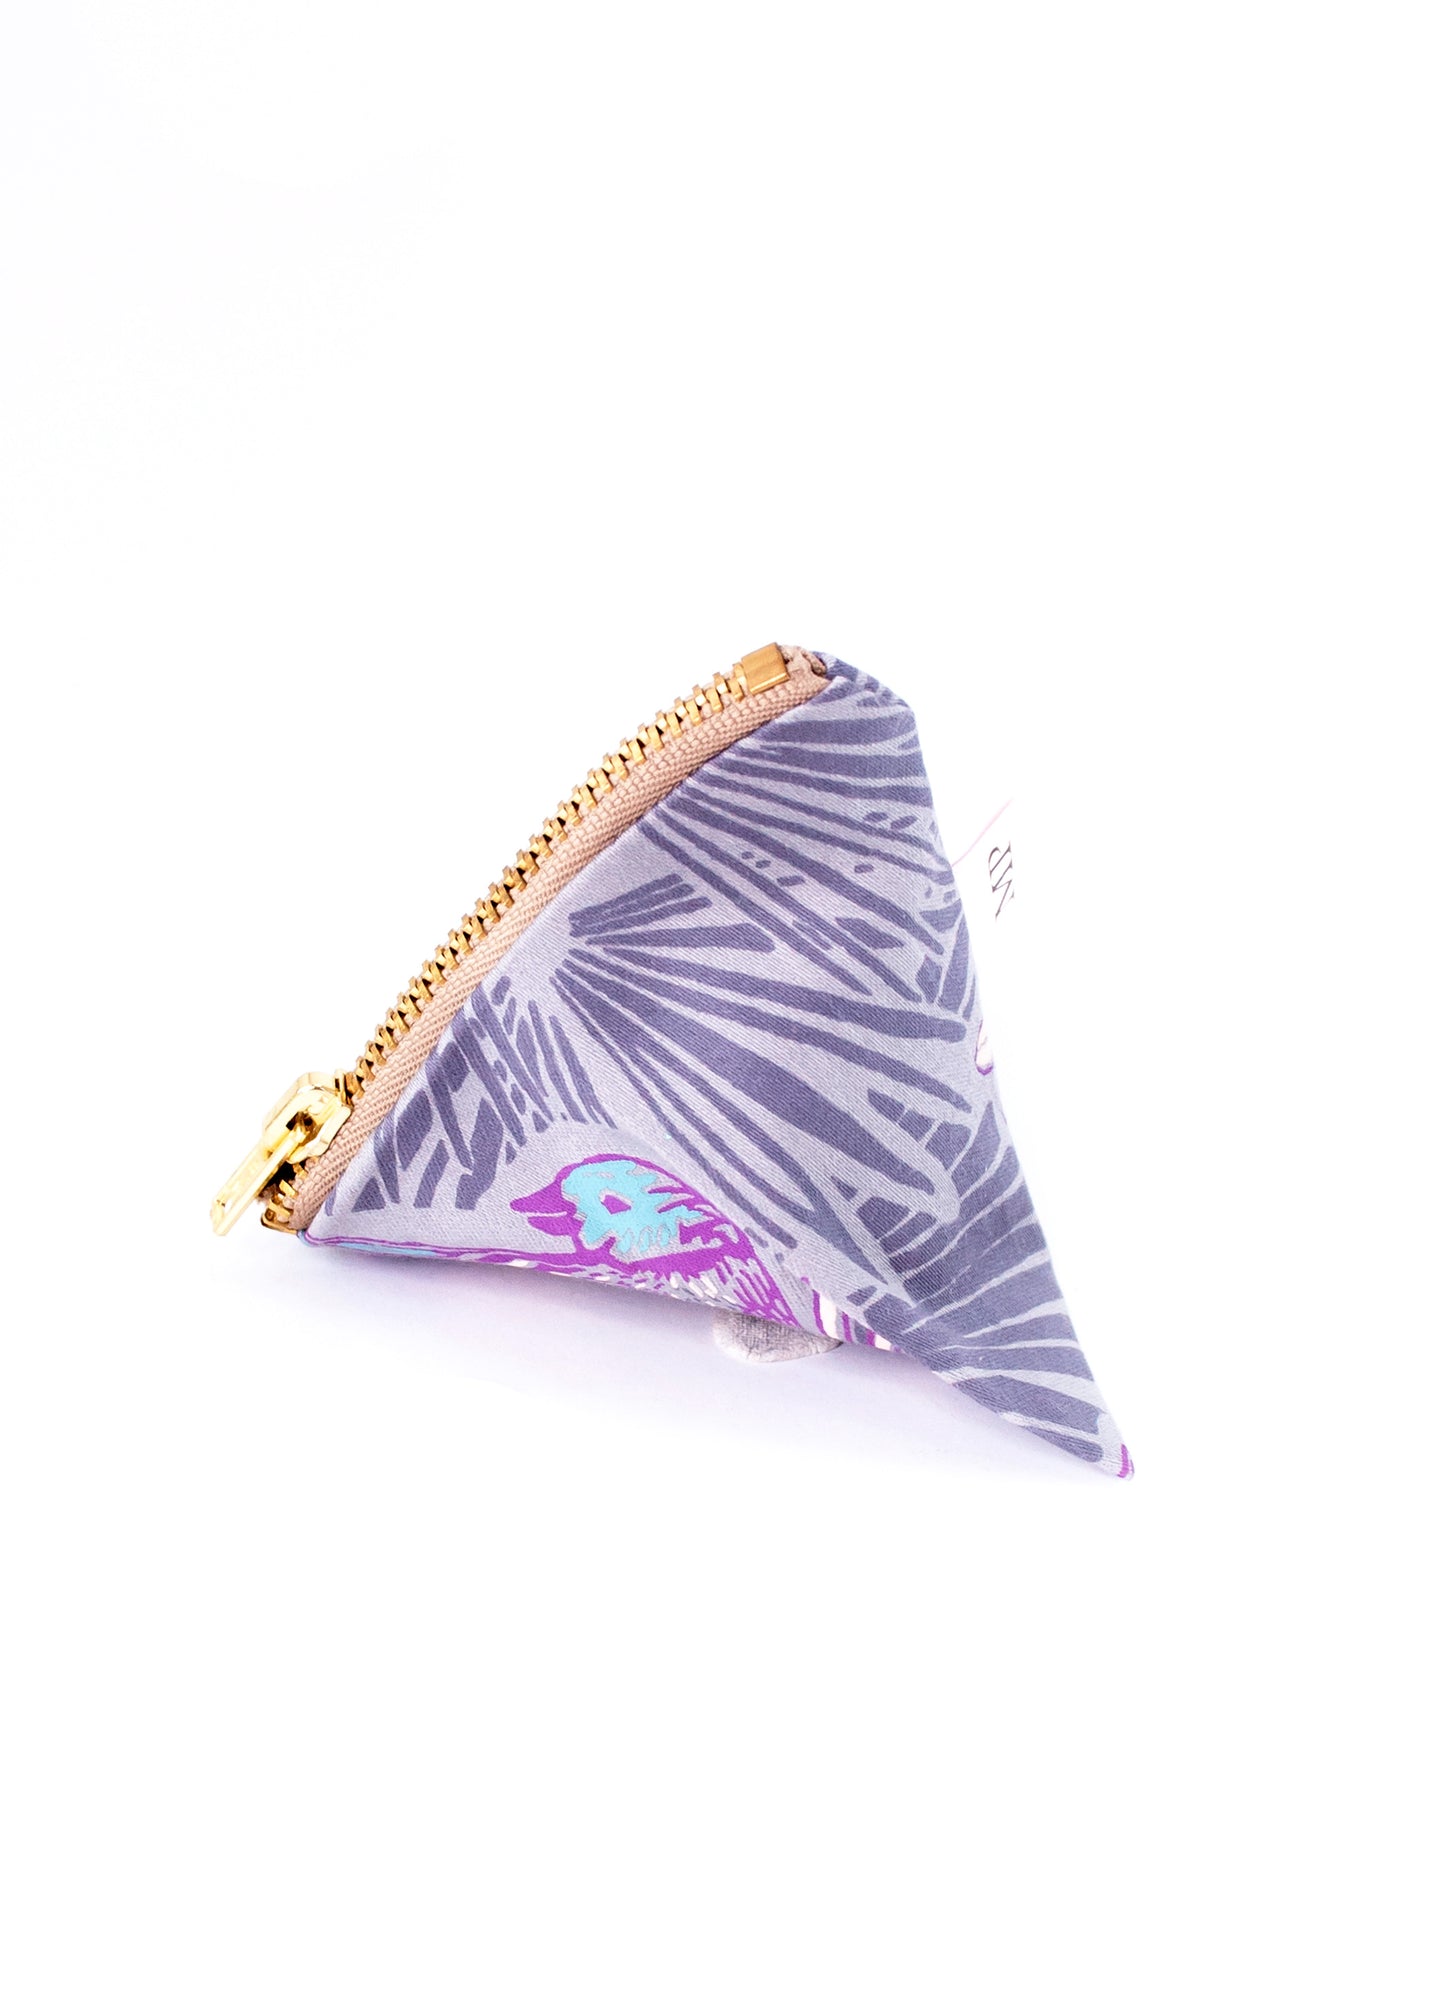 The Matilda pouch in lavender Paradise Birds print